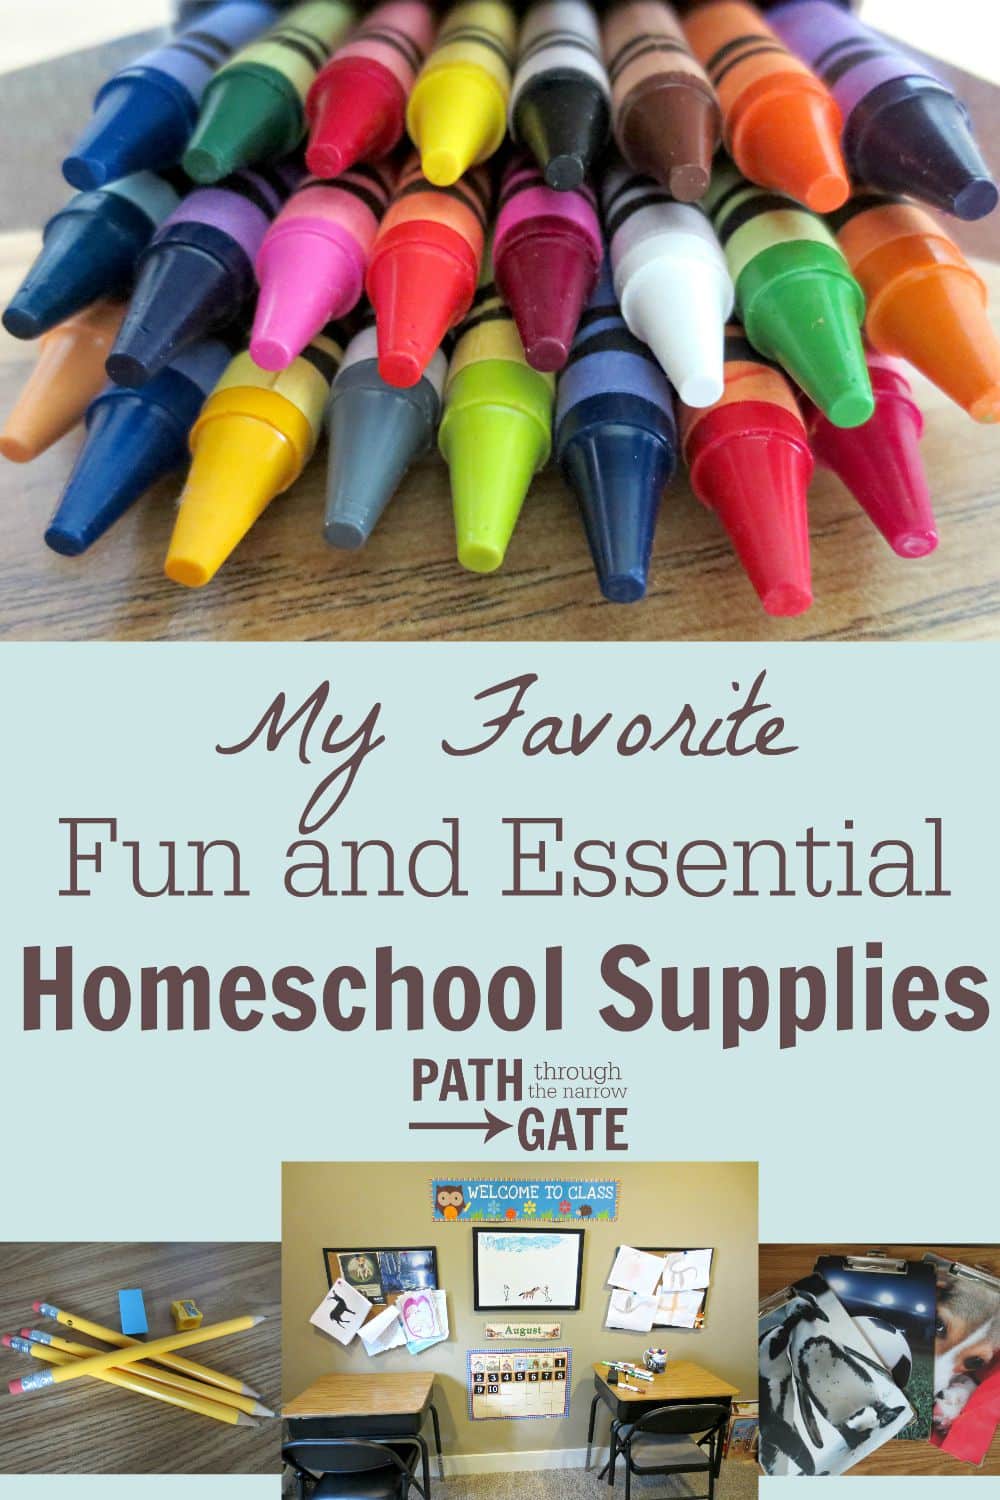 Its almost time to start school! Here is a list of some of my favorite fun and essential homeschool supplies.